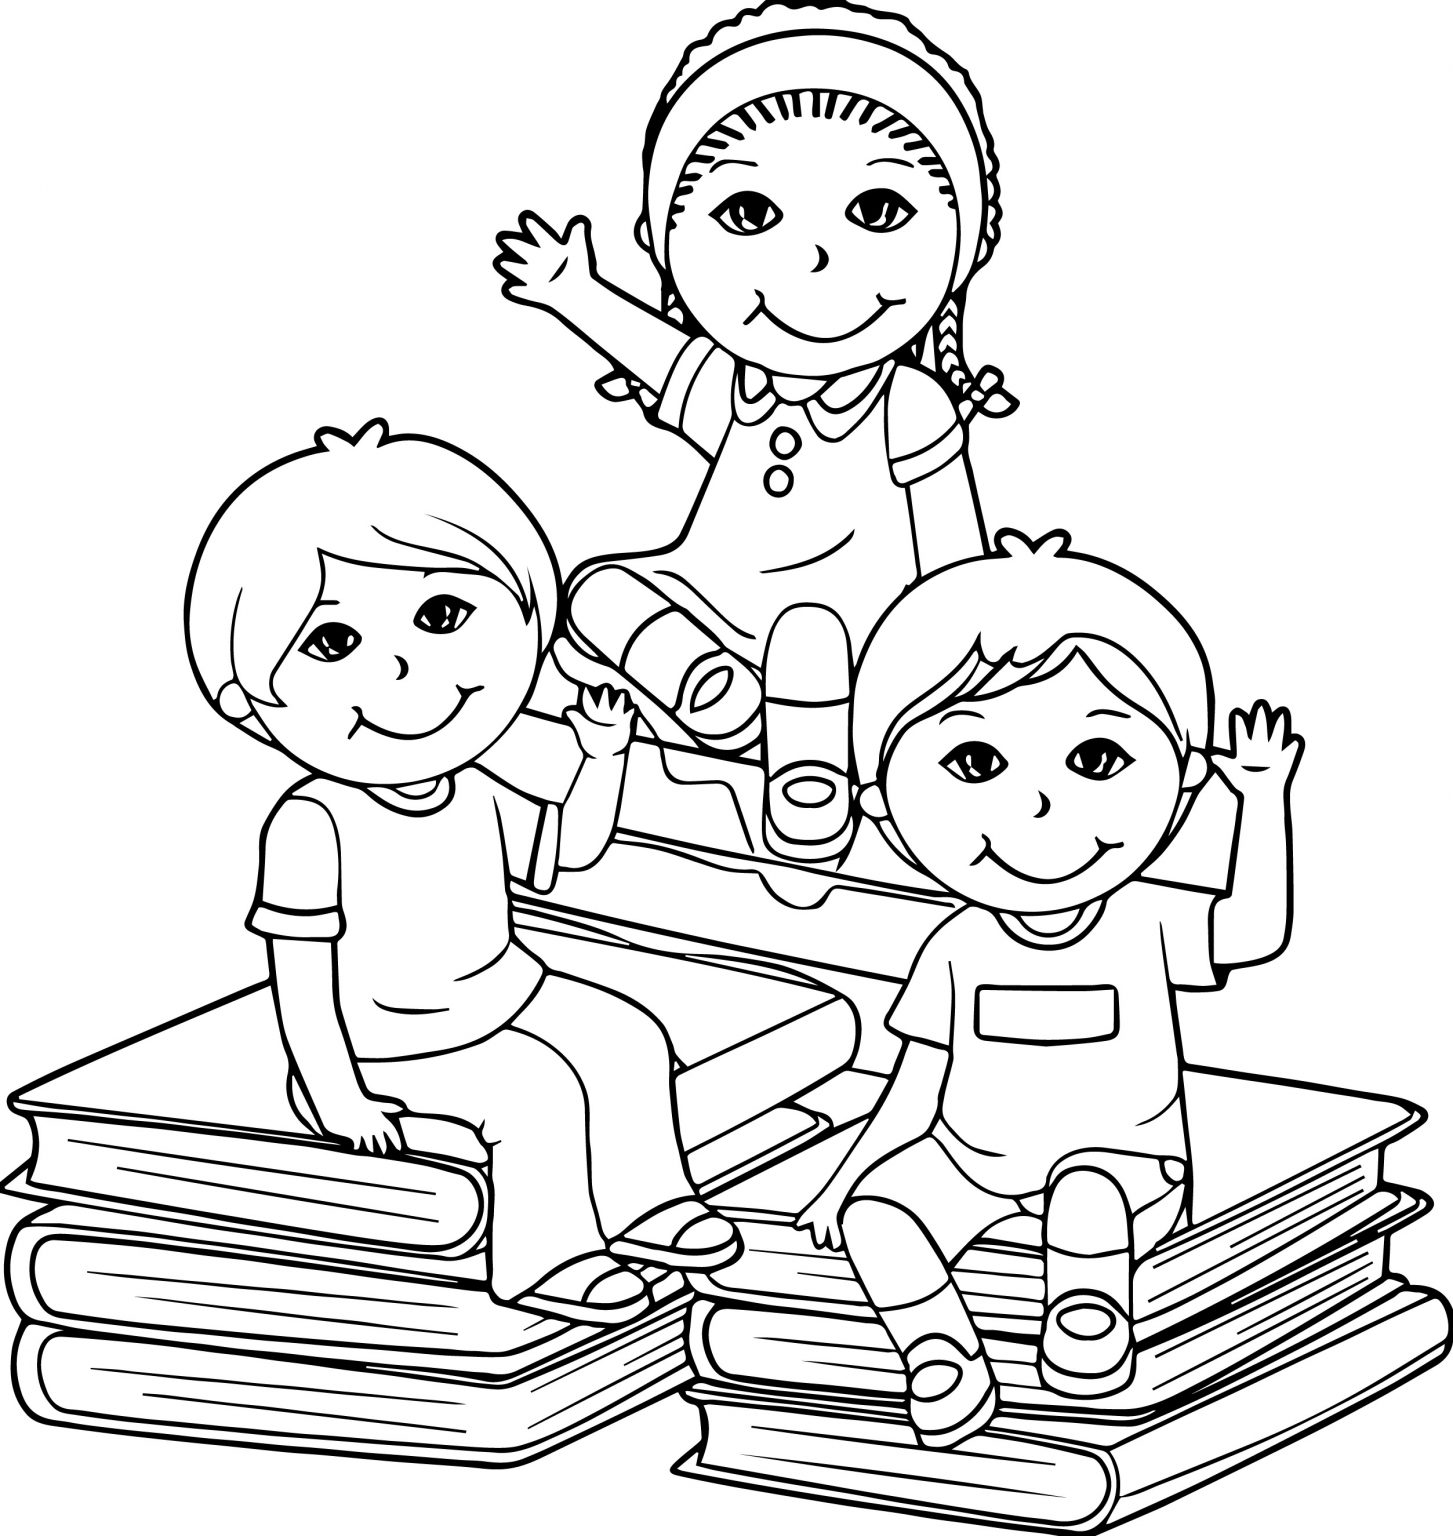 Baby Pacman Coloring Page - Wecoloringpage.com